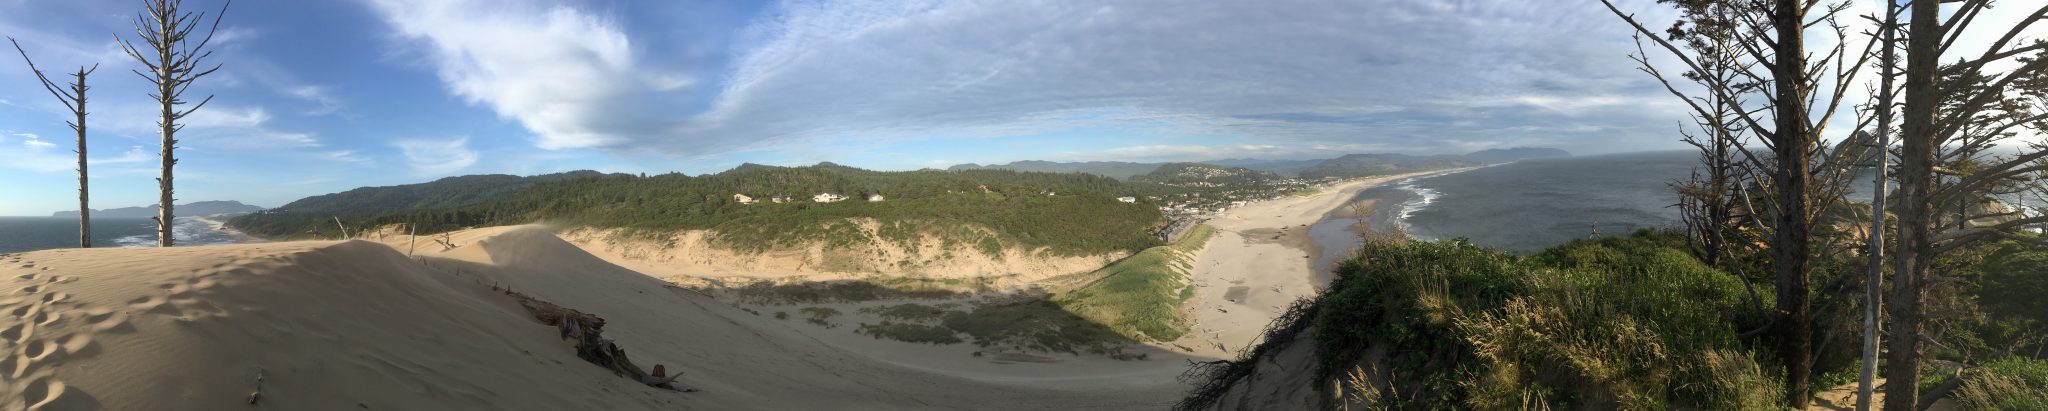 View from the top of the dune in Pacific City